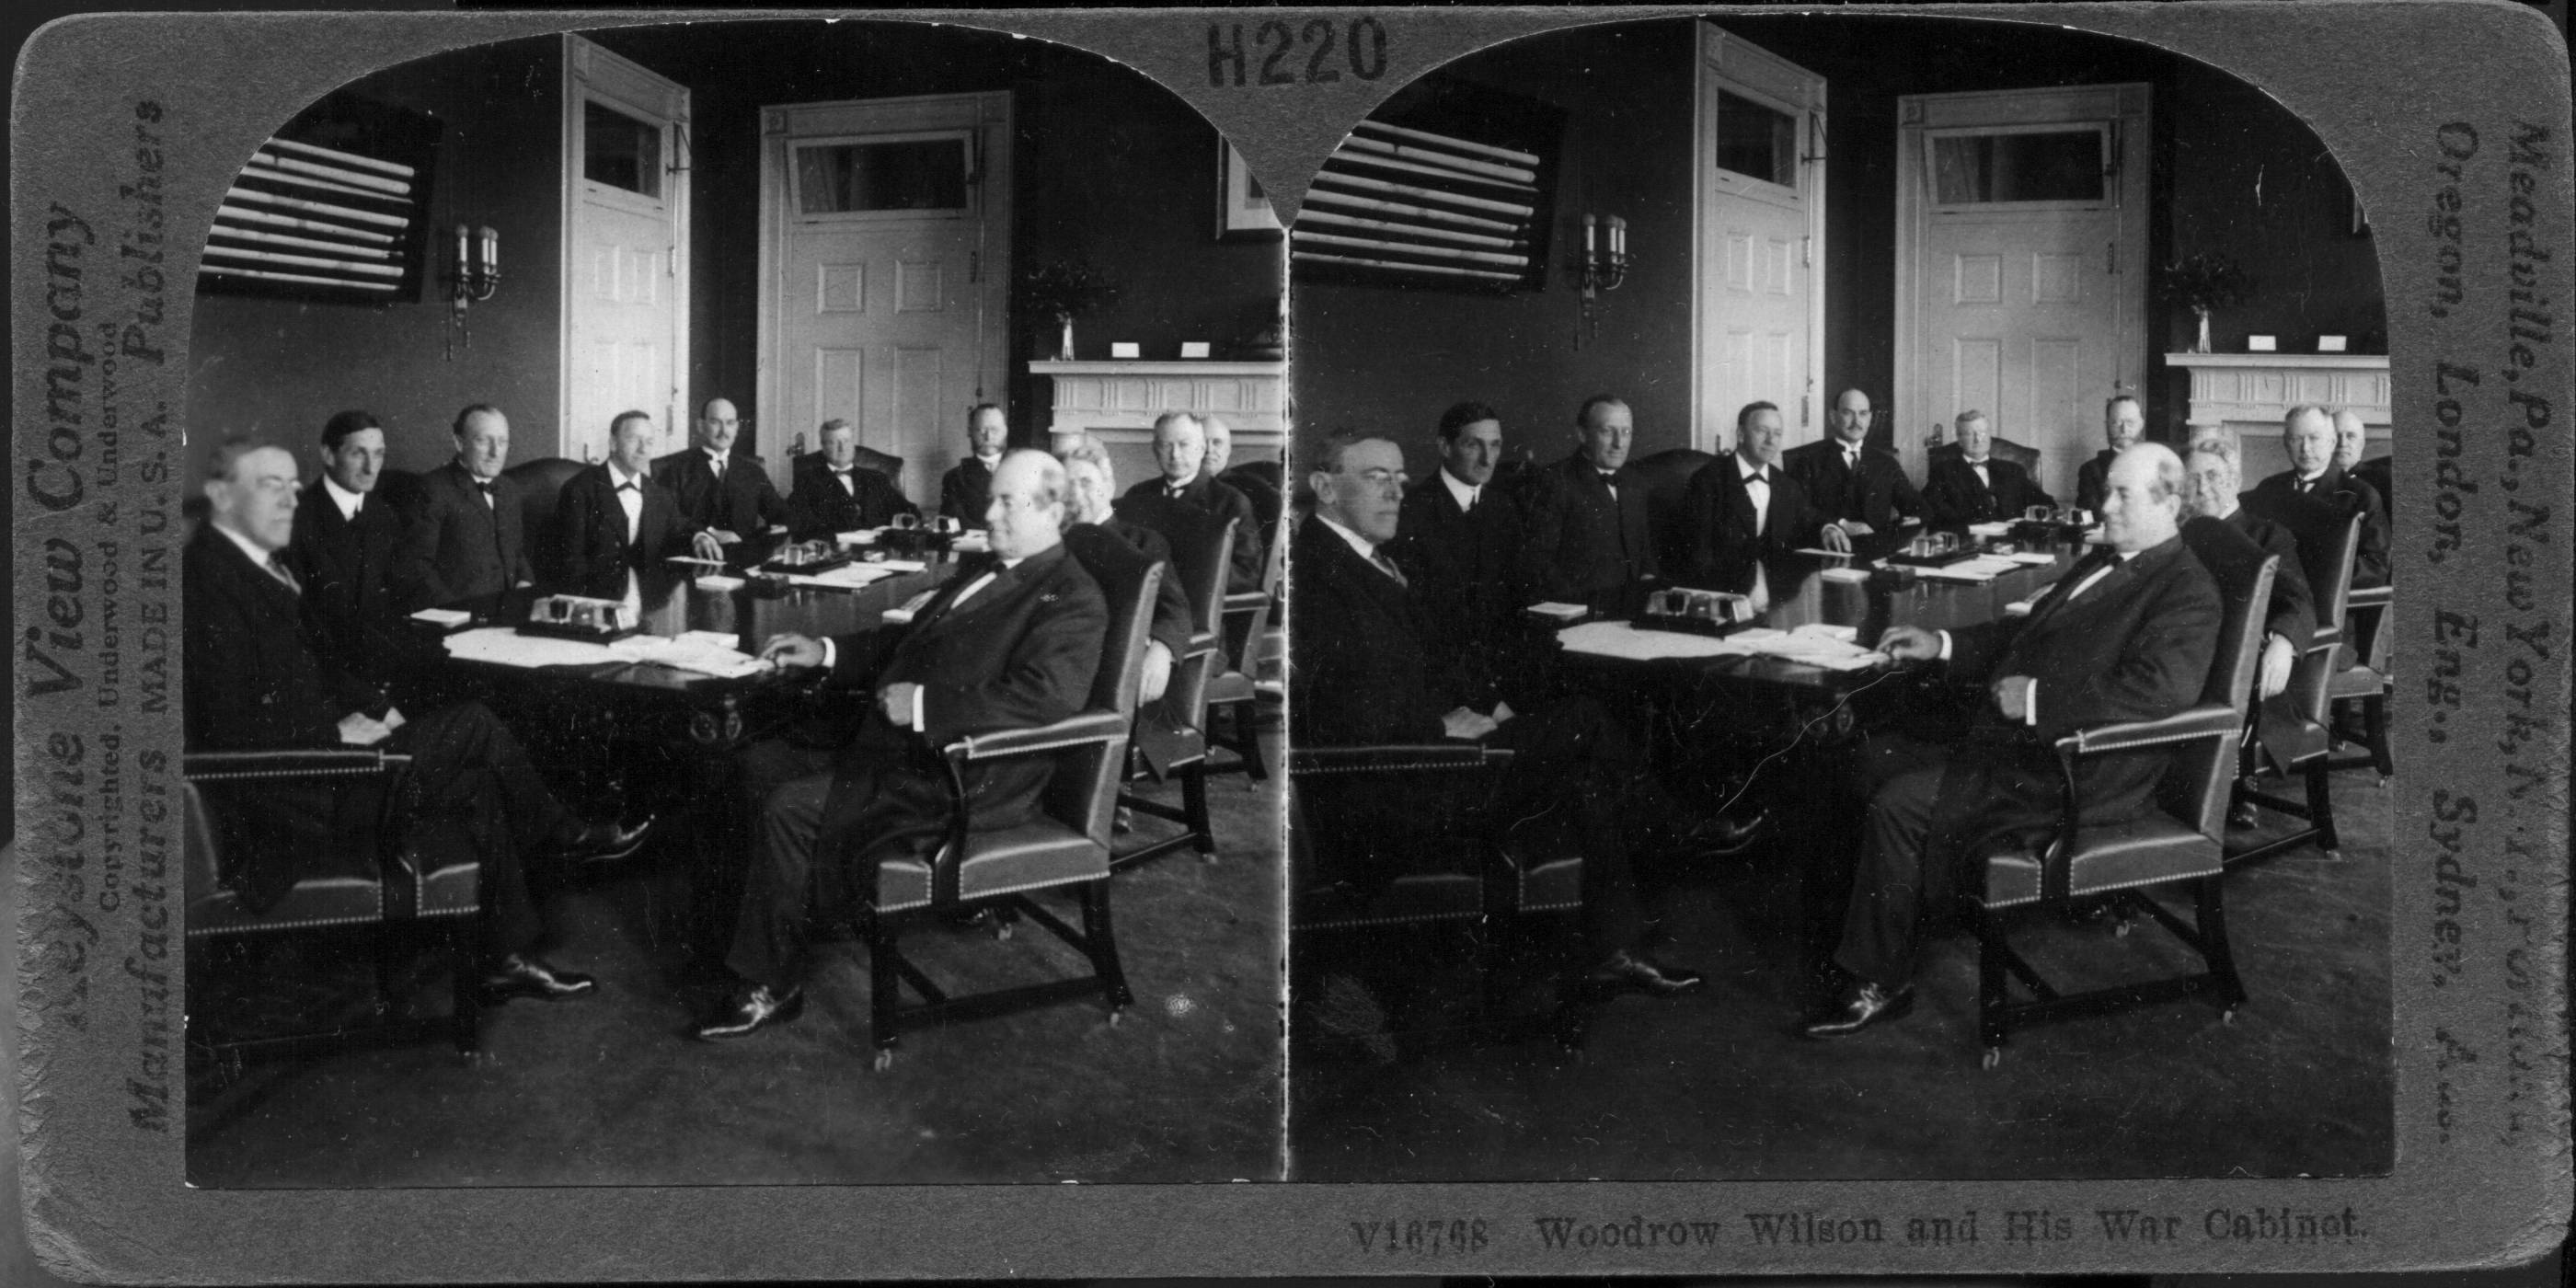 Woodrow Wilson and His War Cabinet